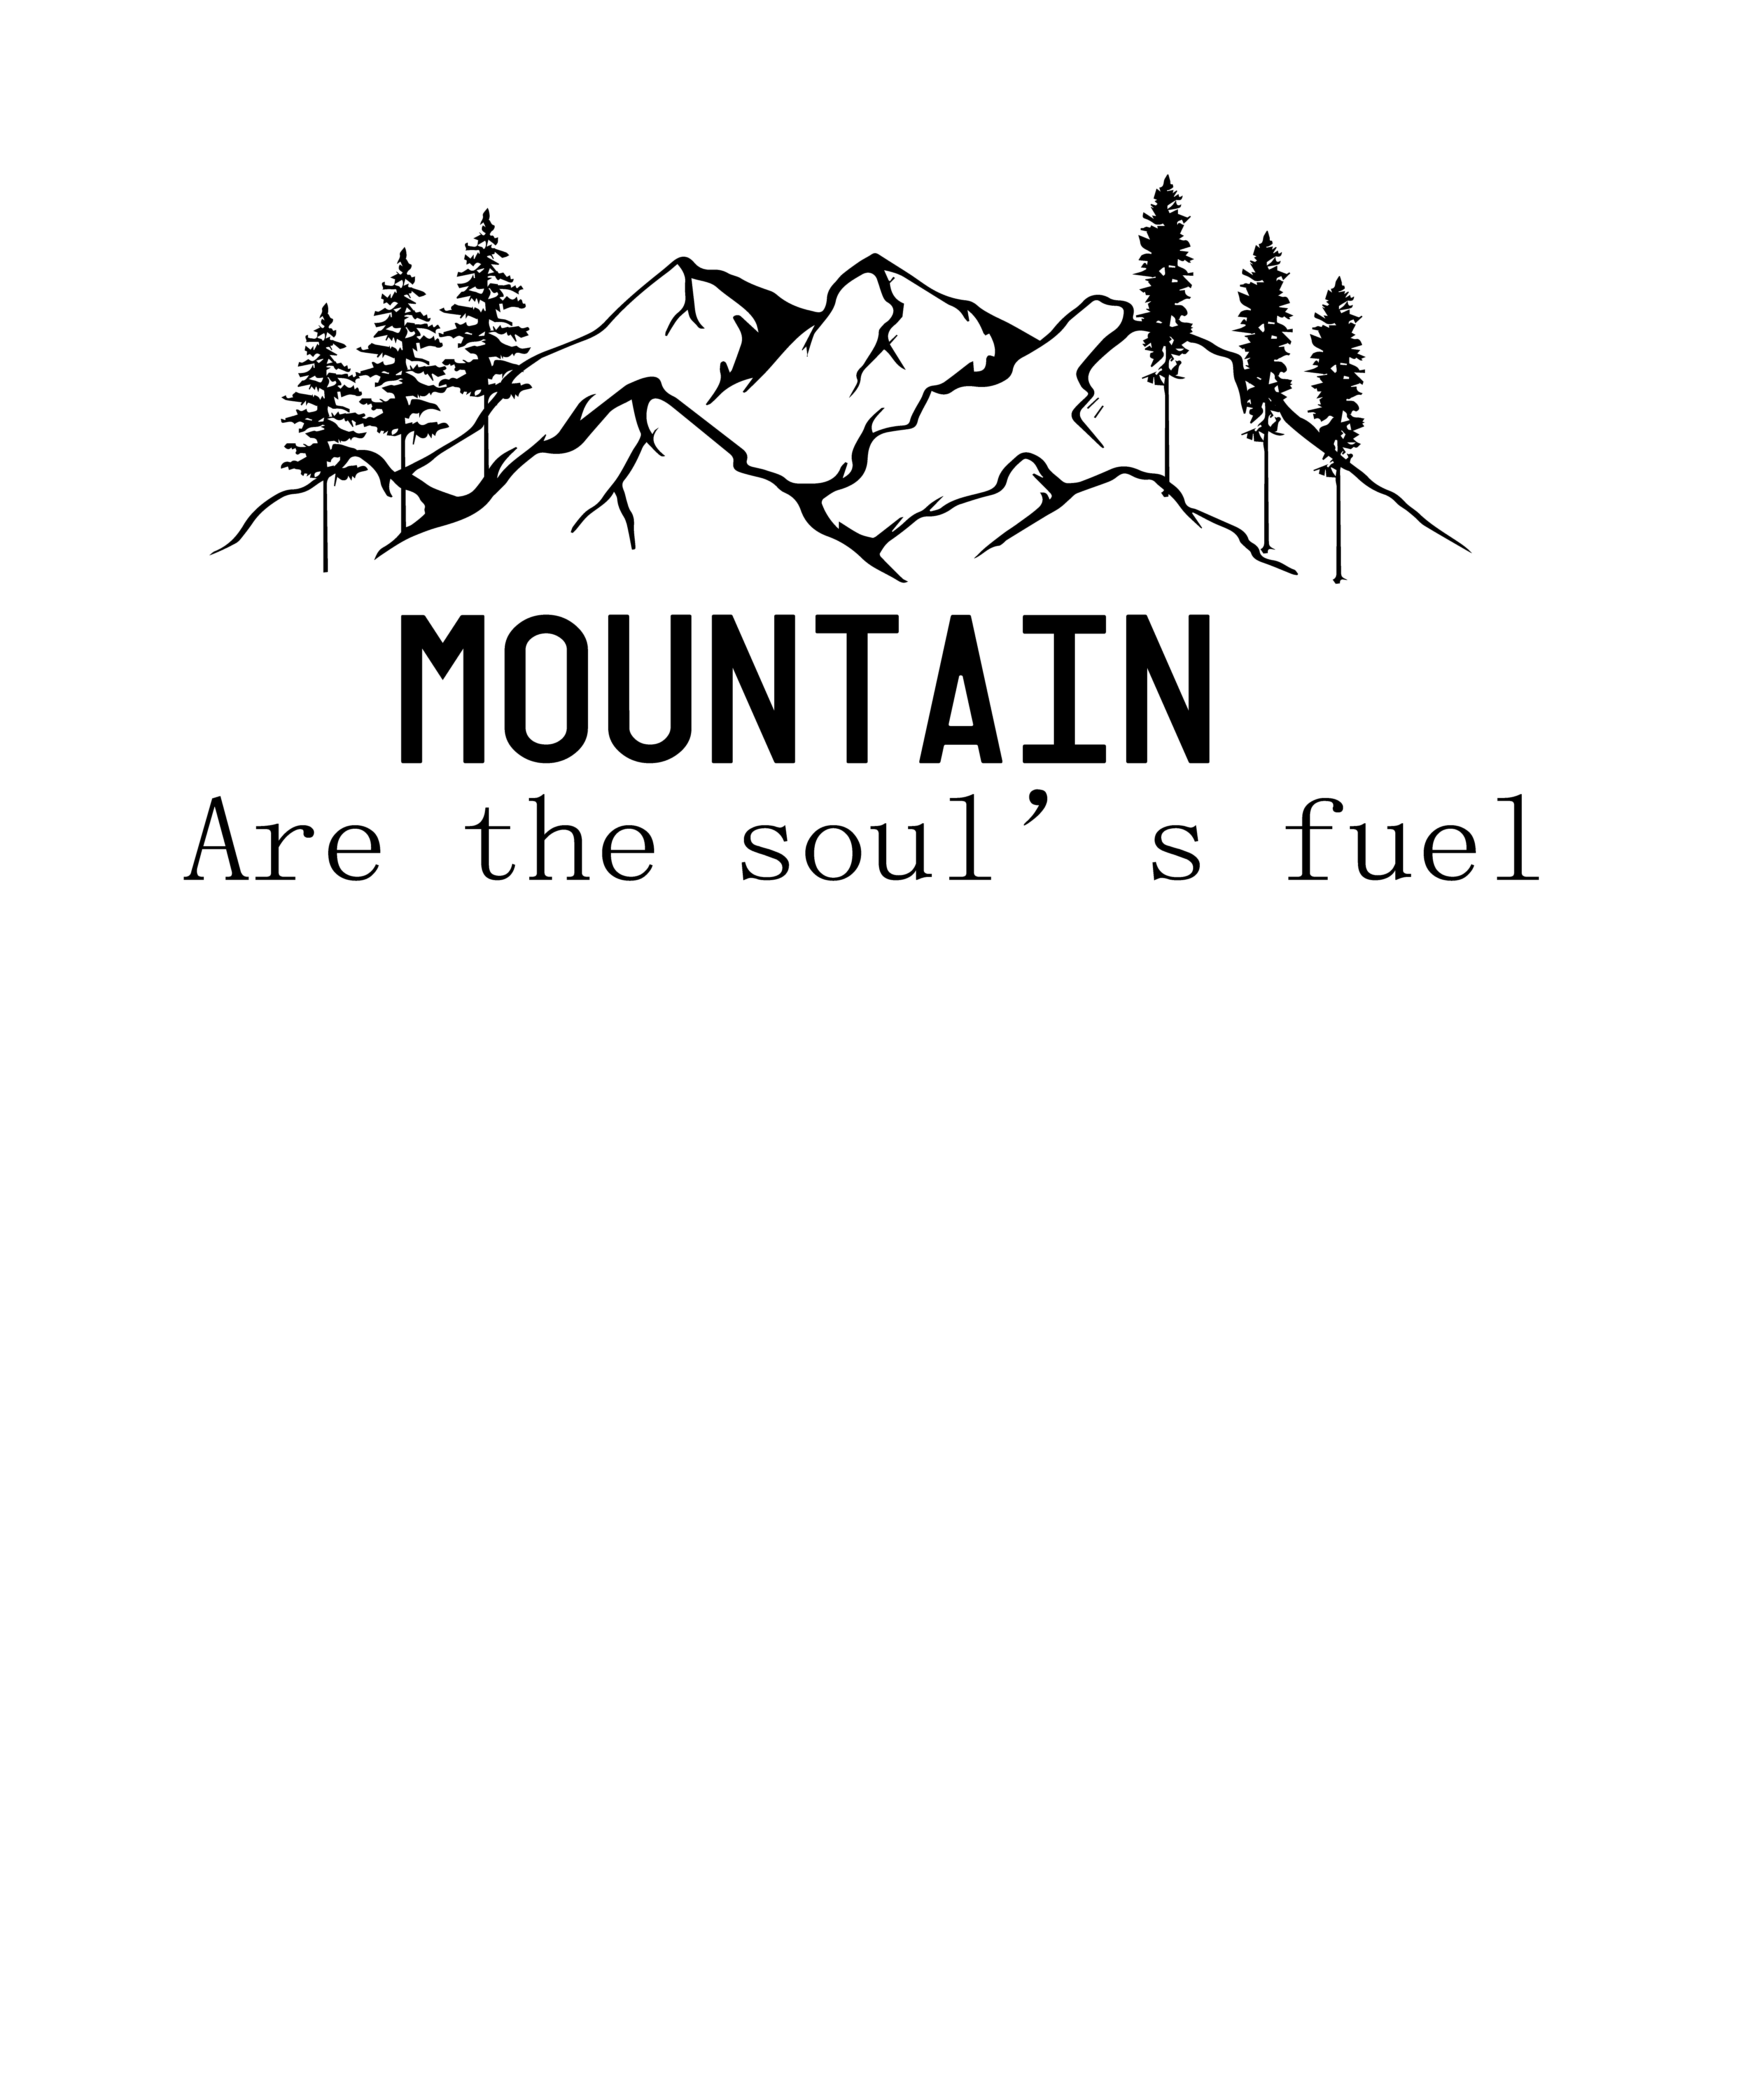 Mountain are the soul’s fuel t shirt design